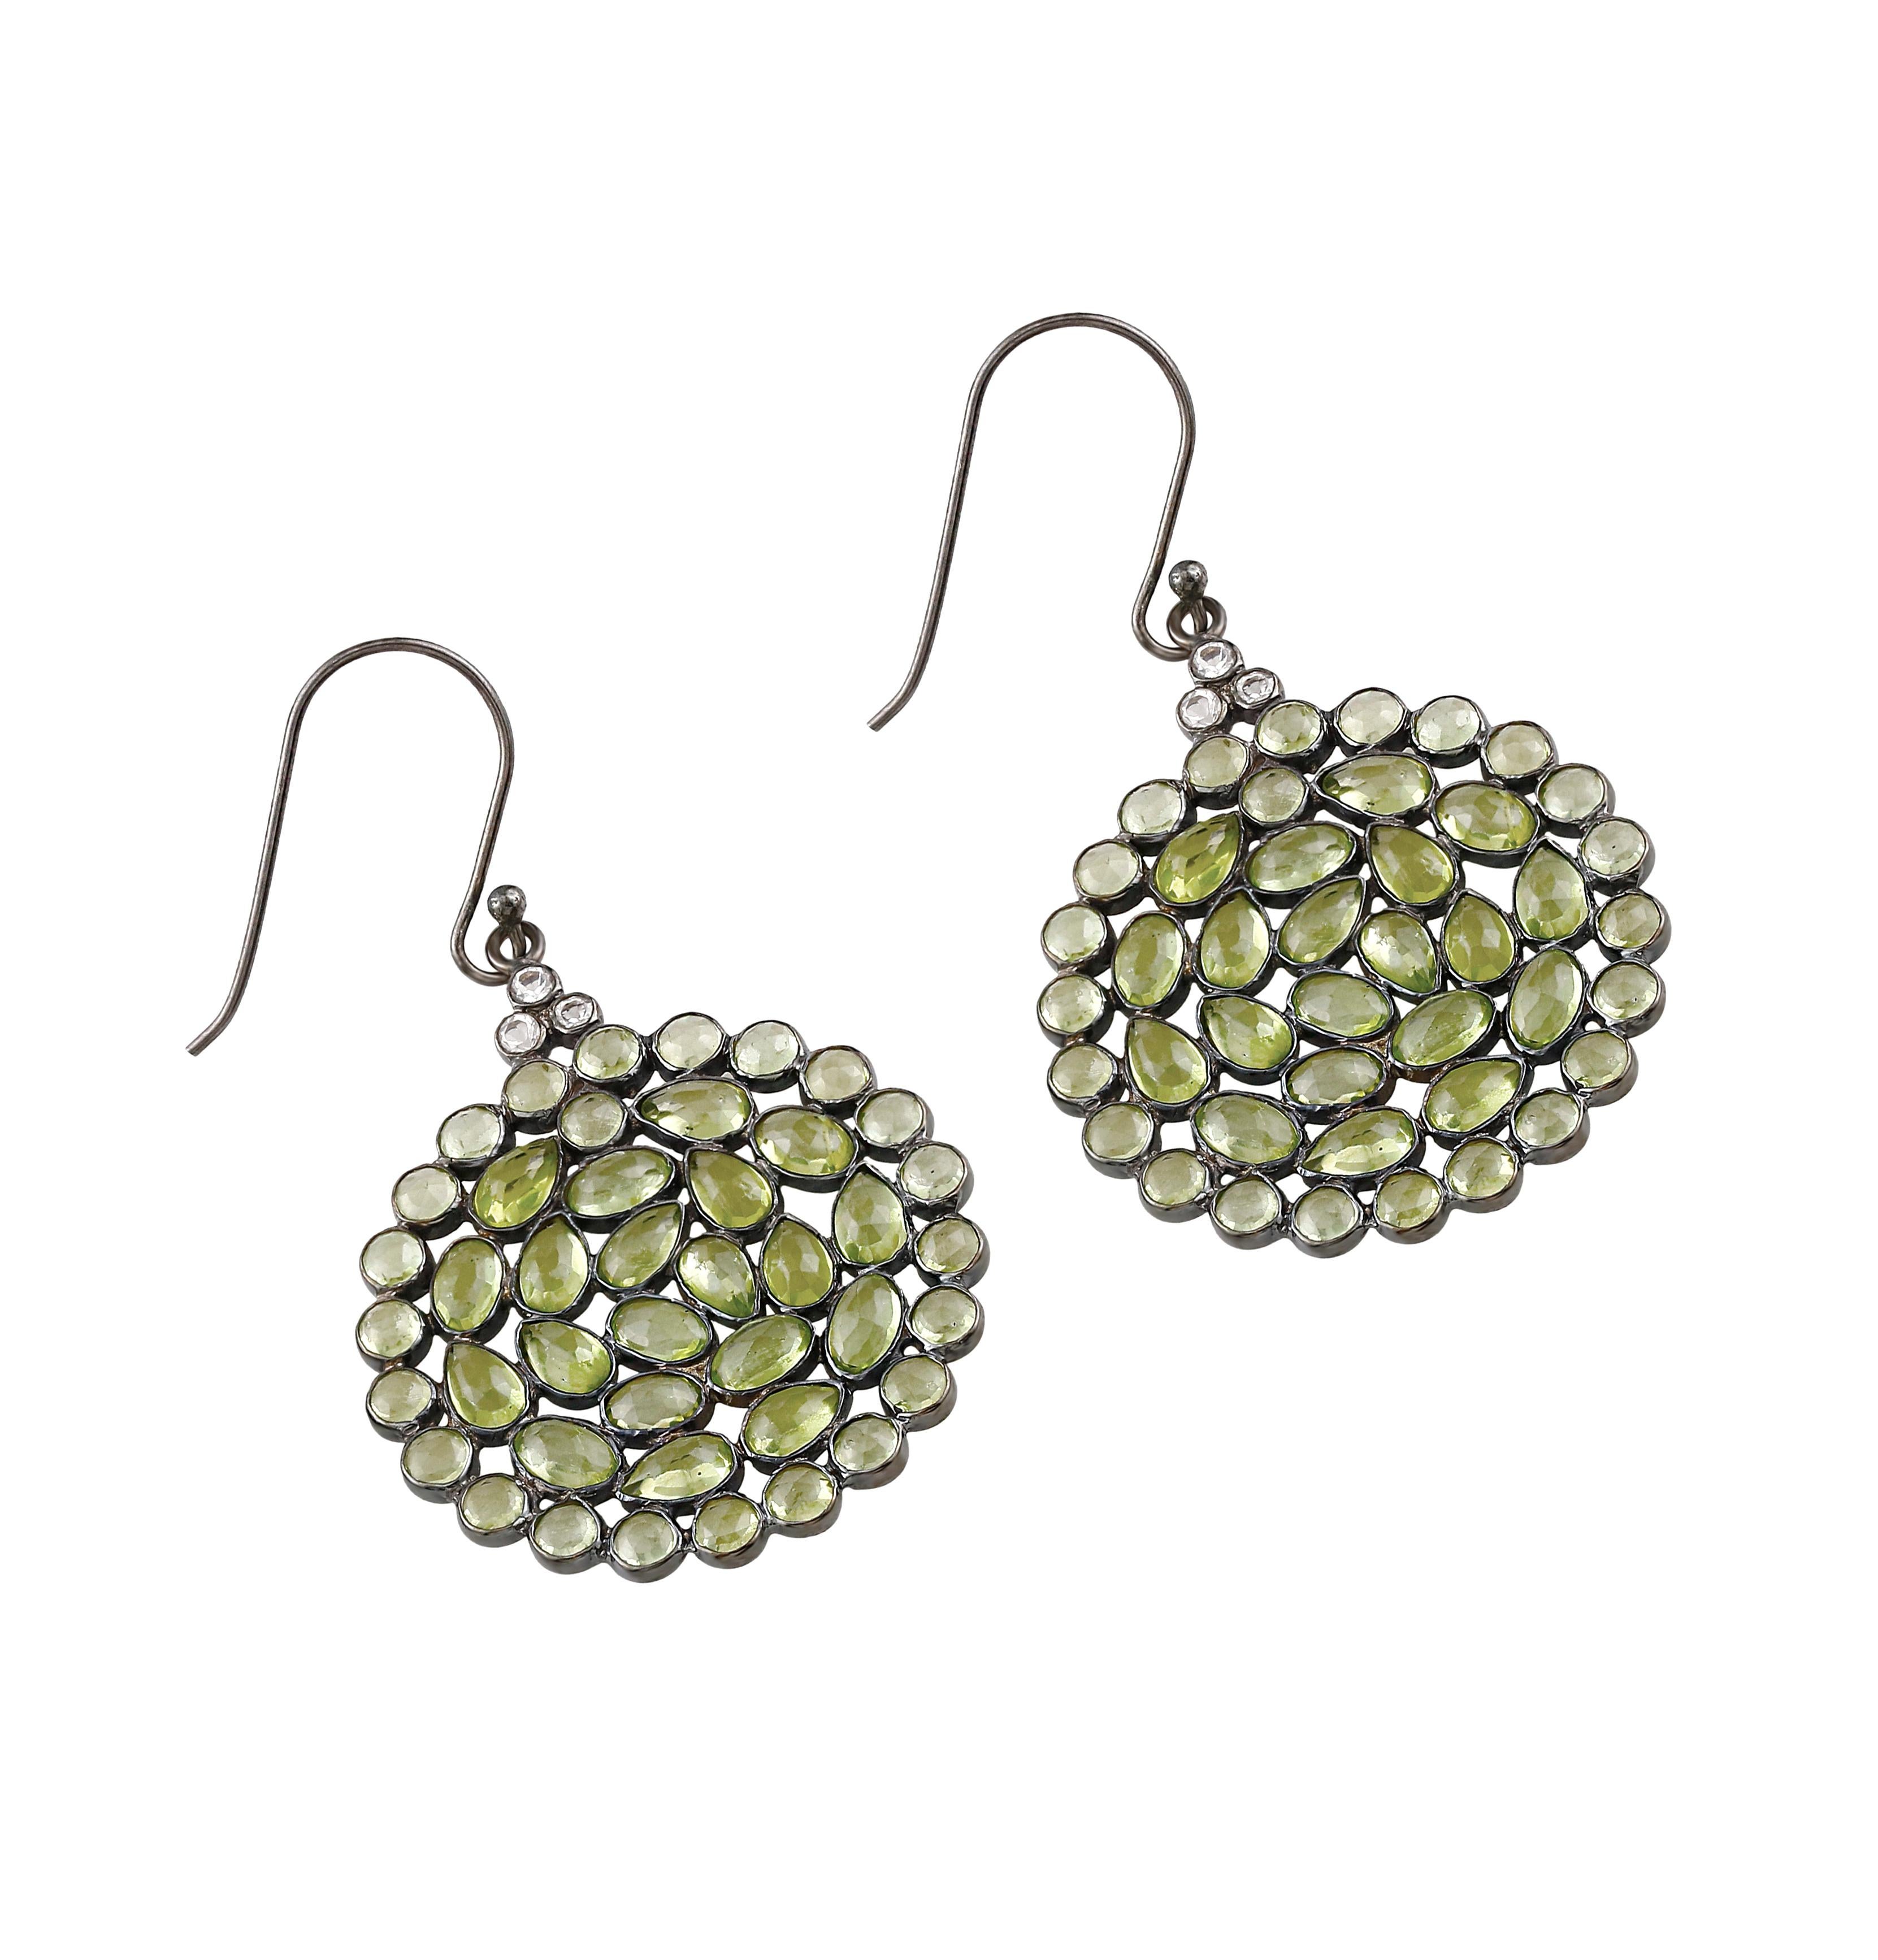 You will definitely love the sparkling hues of these Gemistry Victorian handcrafted sterling silver drops! The classic circular design showcases vibrant peridots accentuated with topazes dangling from lever backs. Pair these with the matching